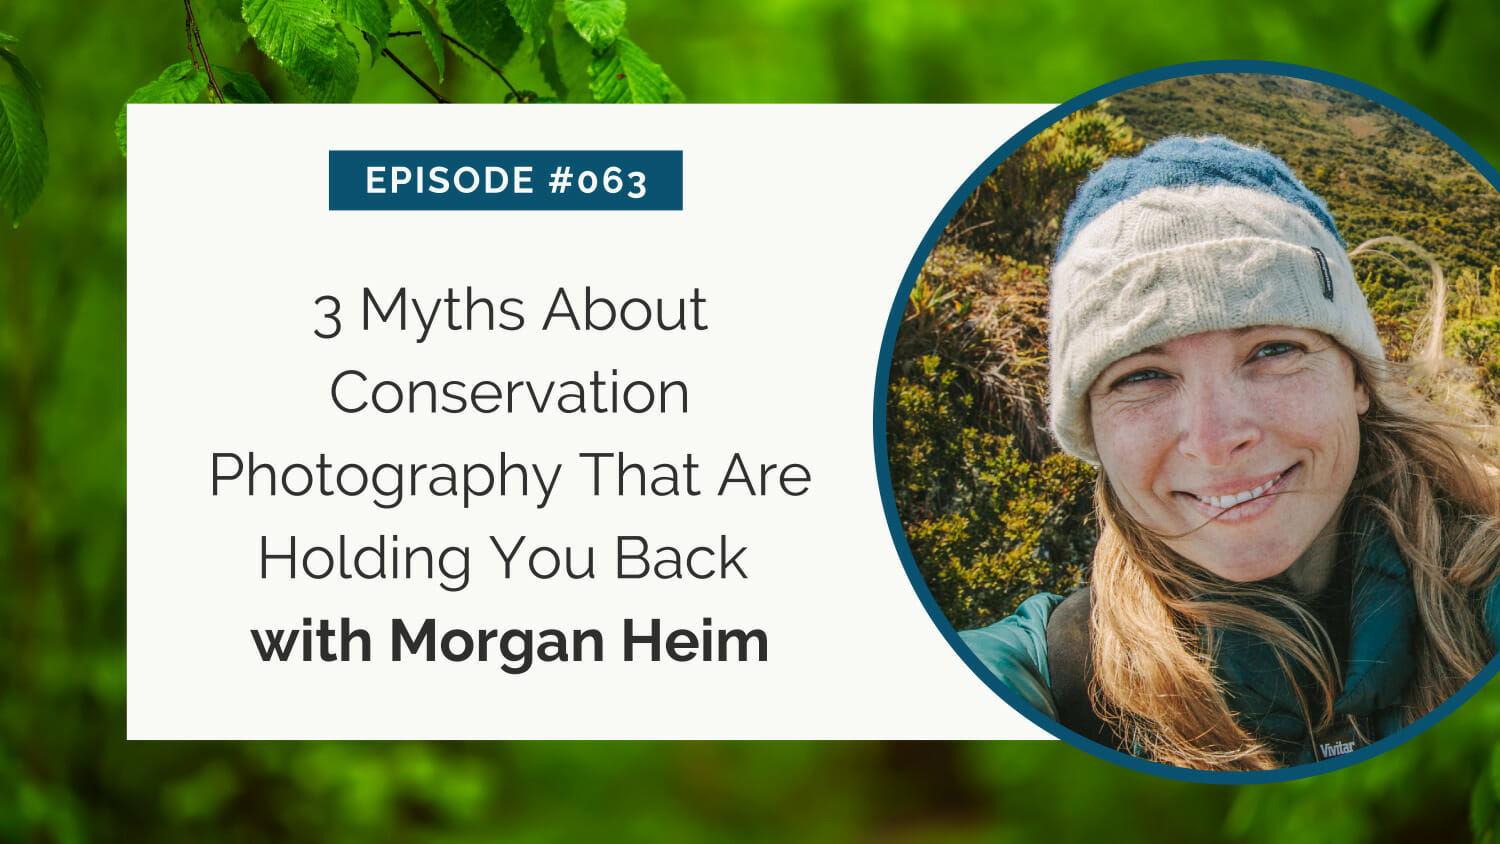 Podcast episode design featuring a guest named morgan heim discussing myths about conservation photography.